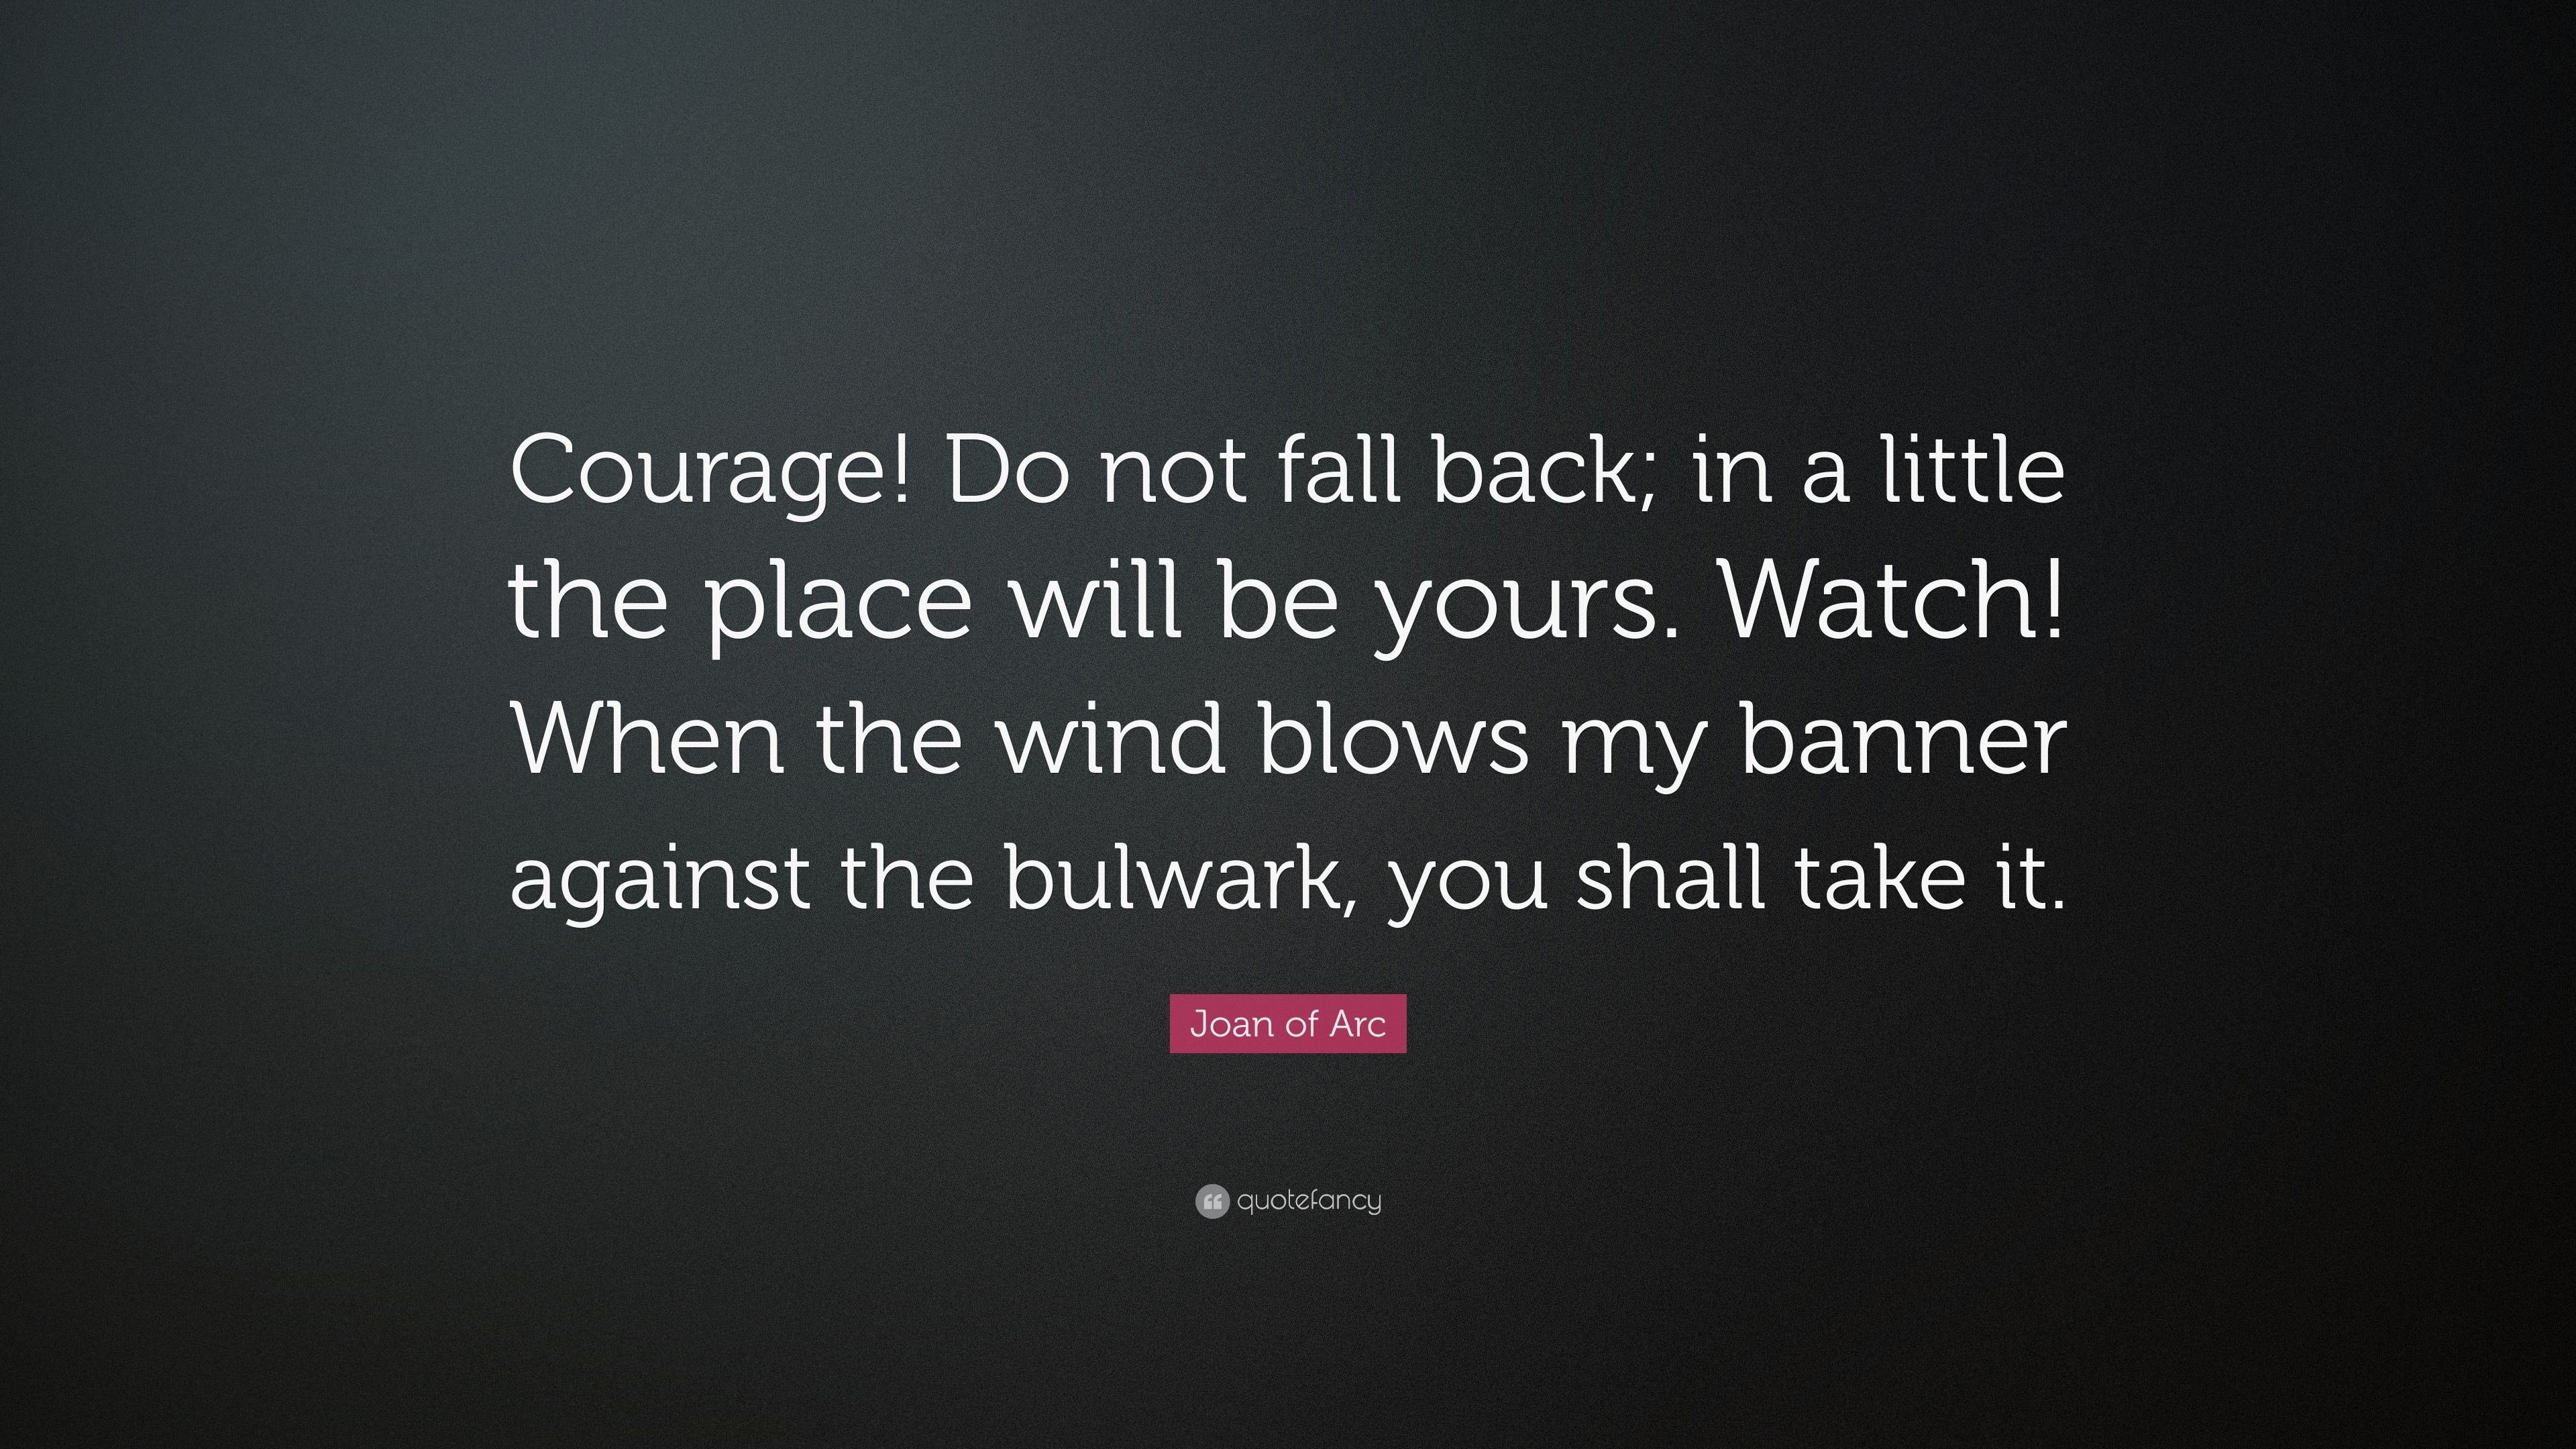 Joan of Arc Quote: “Courage! Do not fall back; in a little the place will be yours. Watch! When the wind blows my banner against the bulwark.” (7 wallpaper)